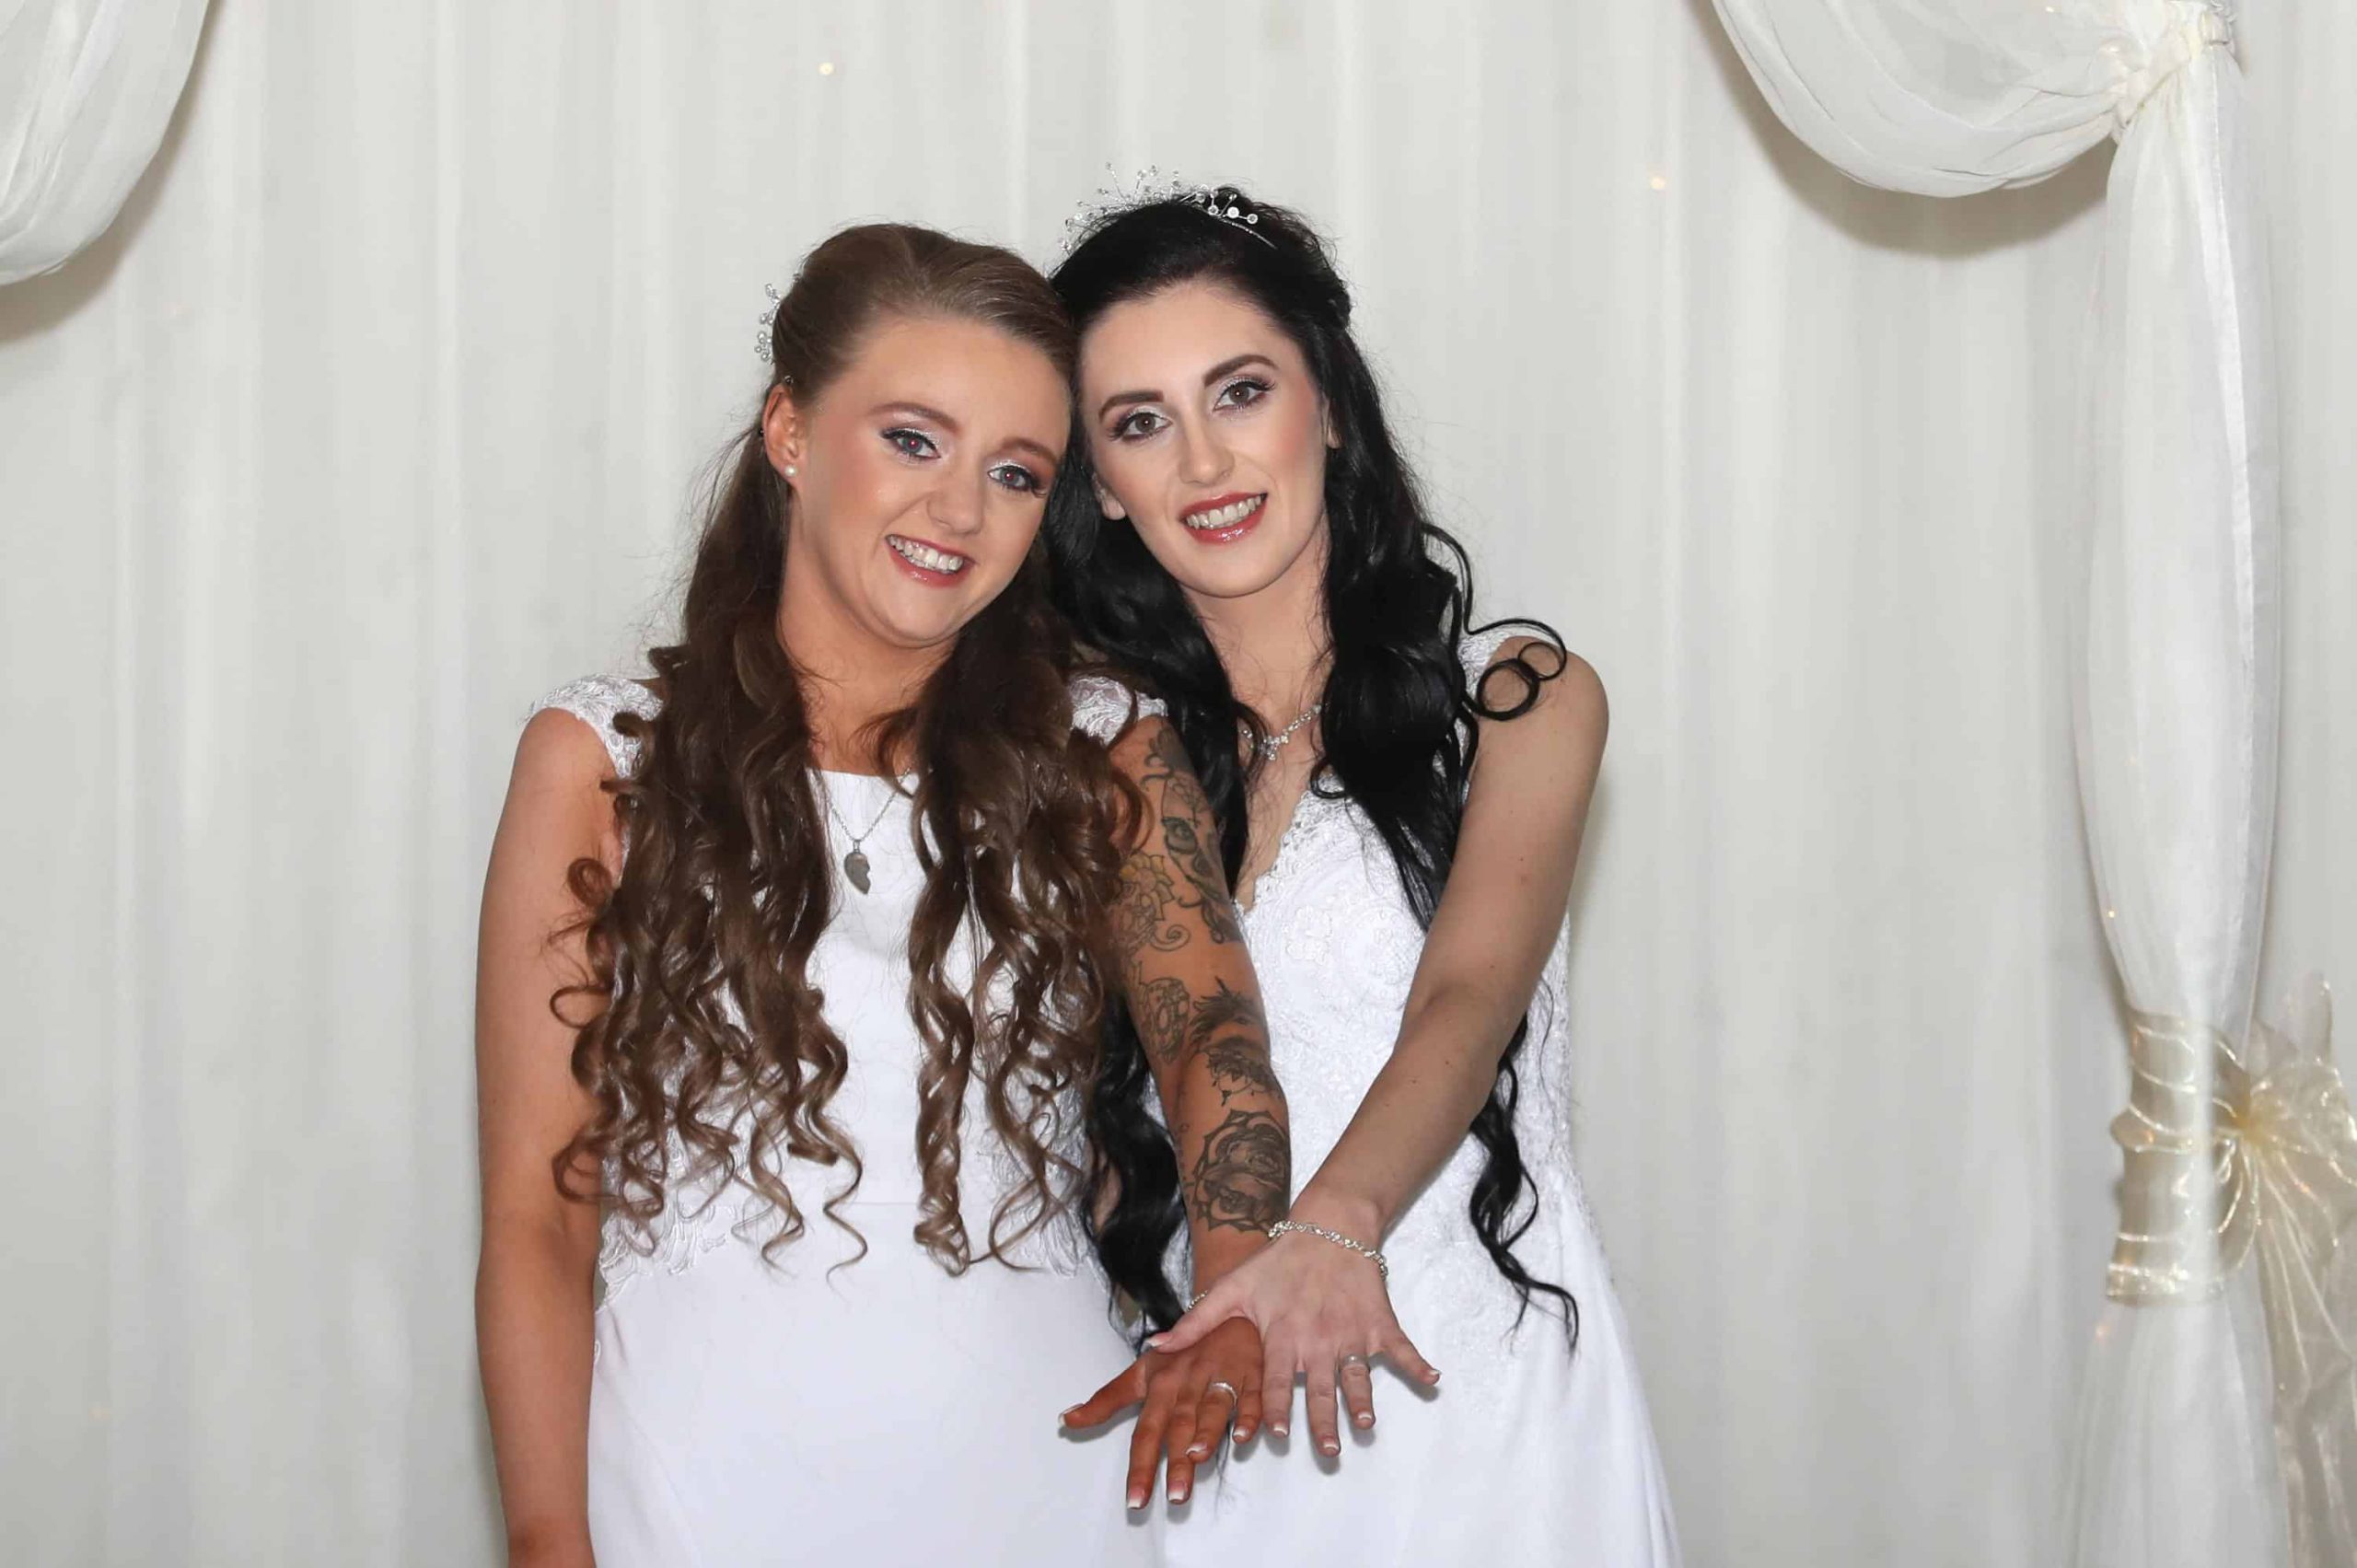 History made as first same-sex marriage takes place in Northern Ireland